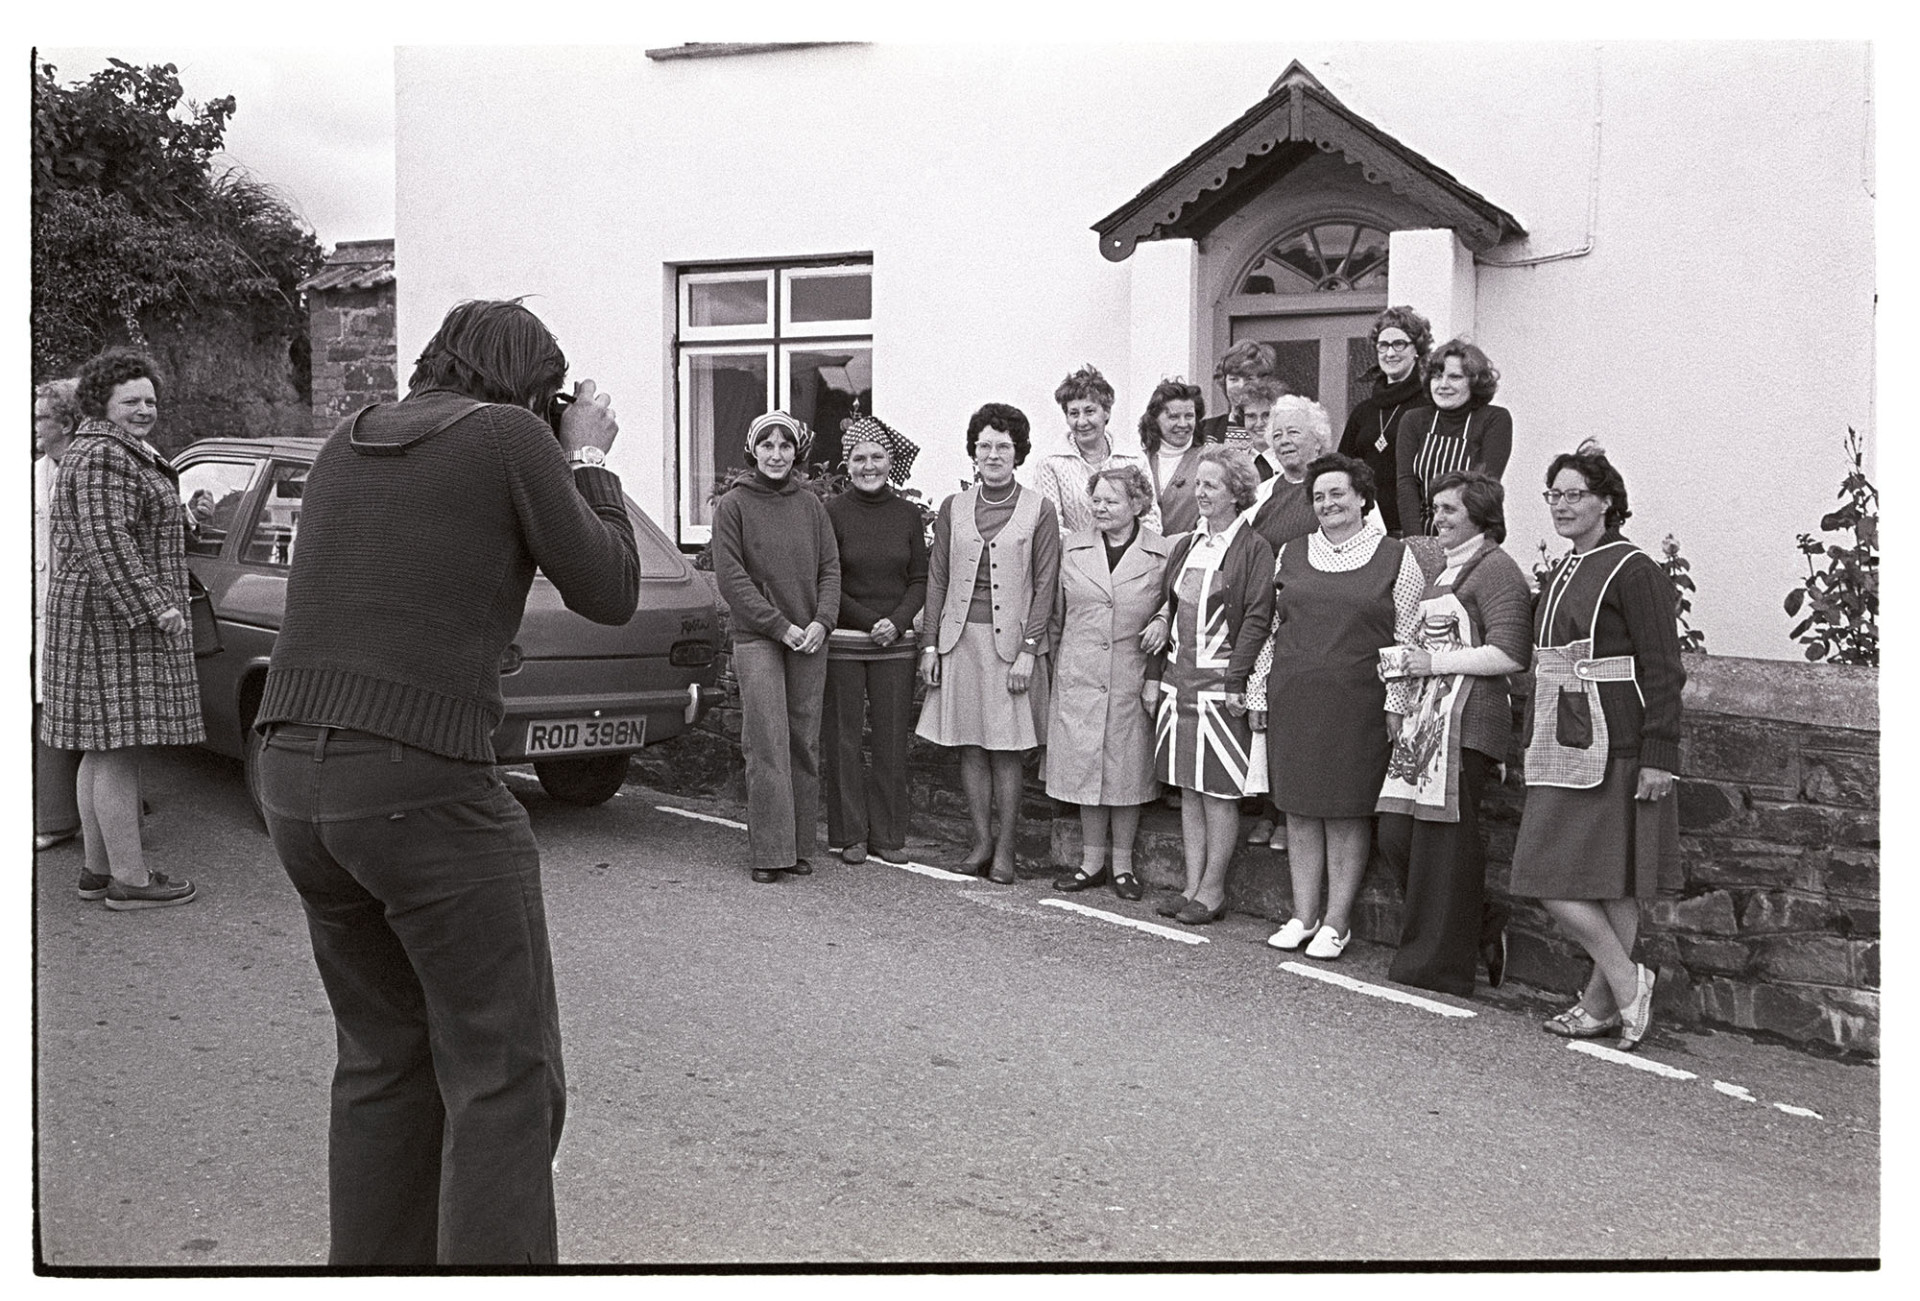 Group of women organisers who worked, photographer taking their photograph.
[Chris Hammond taking a photograph of women gathered outside a cottage in Atherington. They had arranged the celebration for the Silver Jubilee of Queen Elizabeth II in the village.]